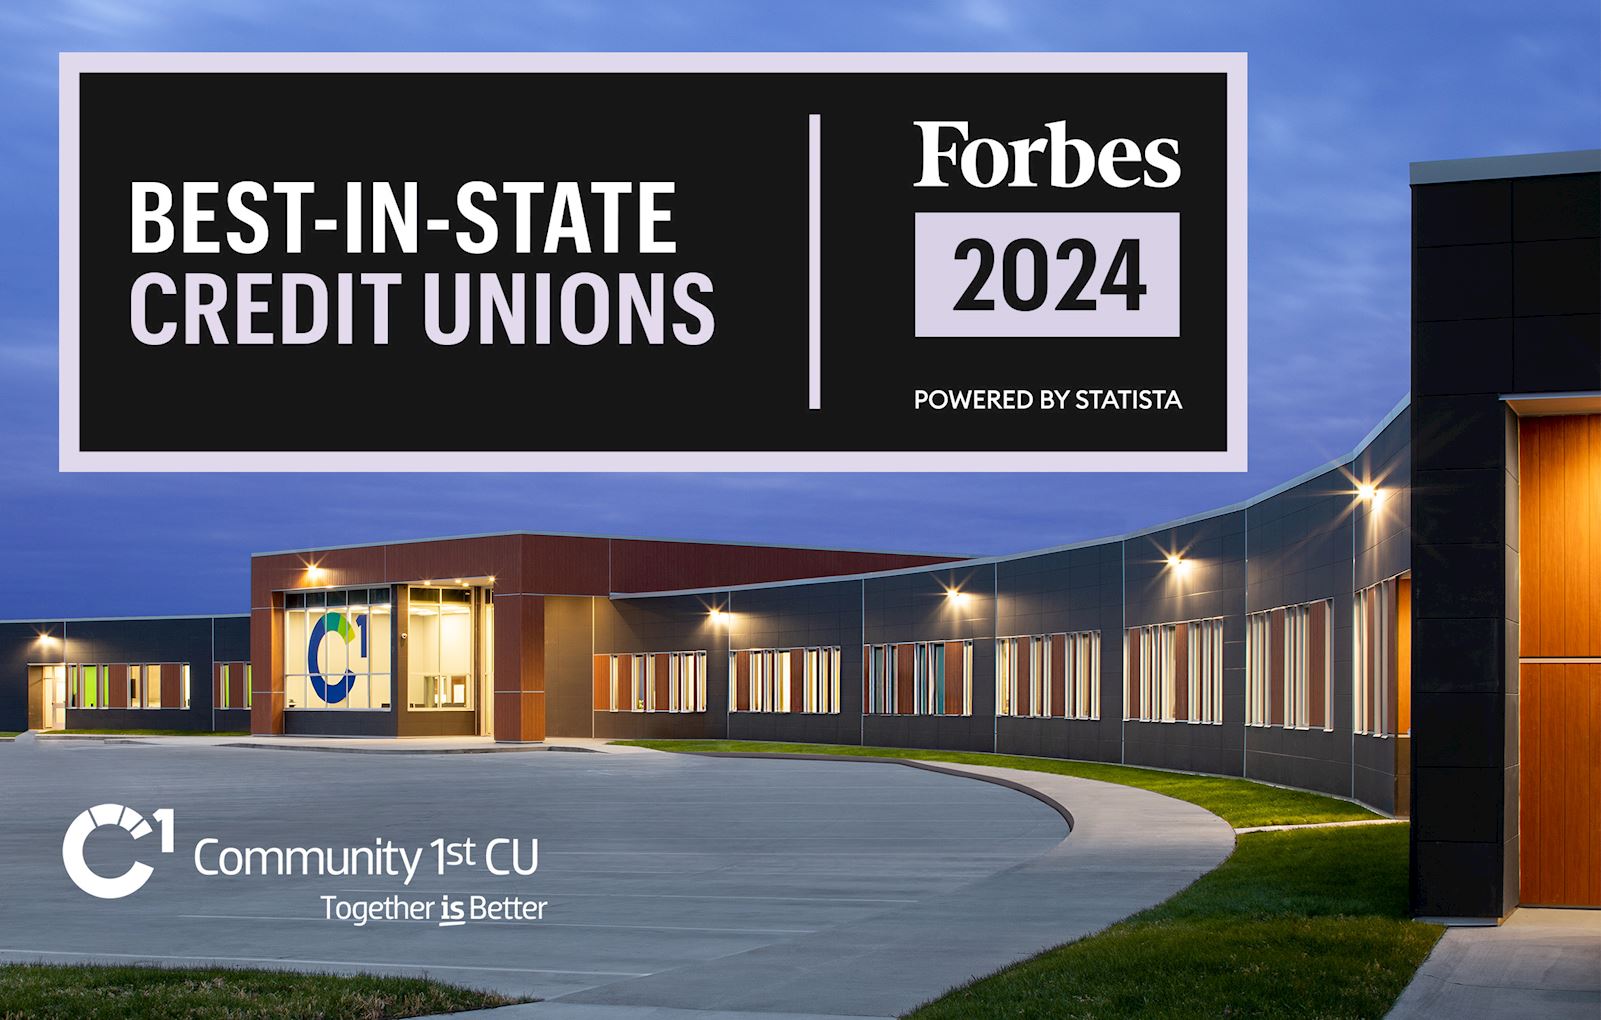 Forbes names Community 1st Credit Union as one of America's Best-In-State Credit Unions in 2024